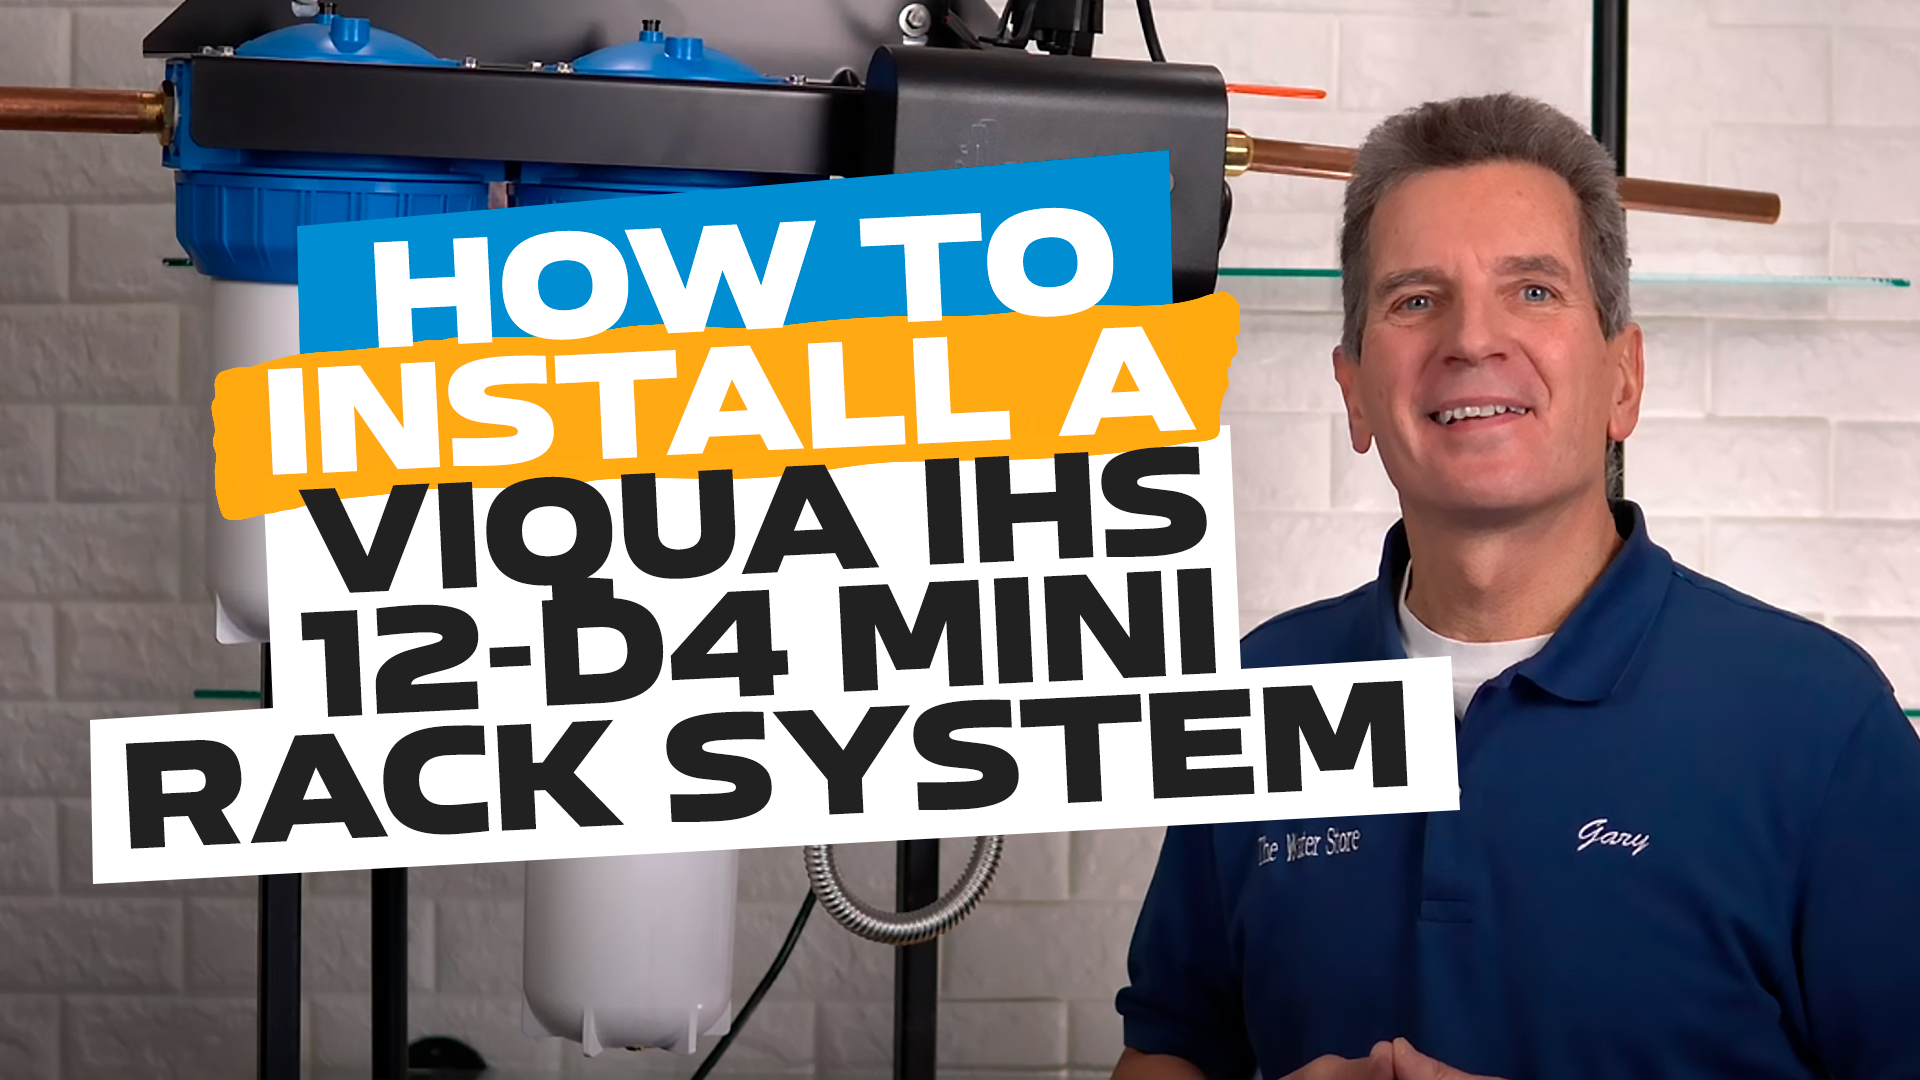 How to install a VIQUA IHS 12-D4 Mini Rack System